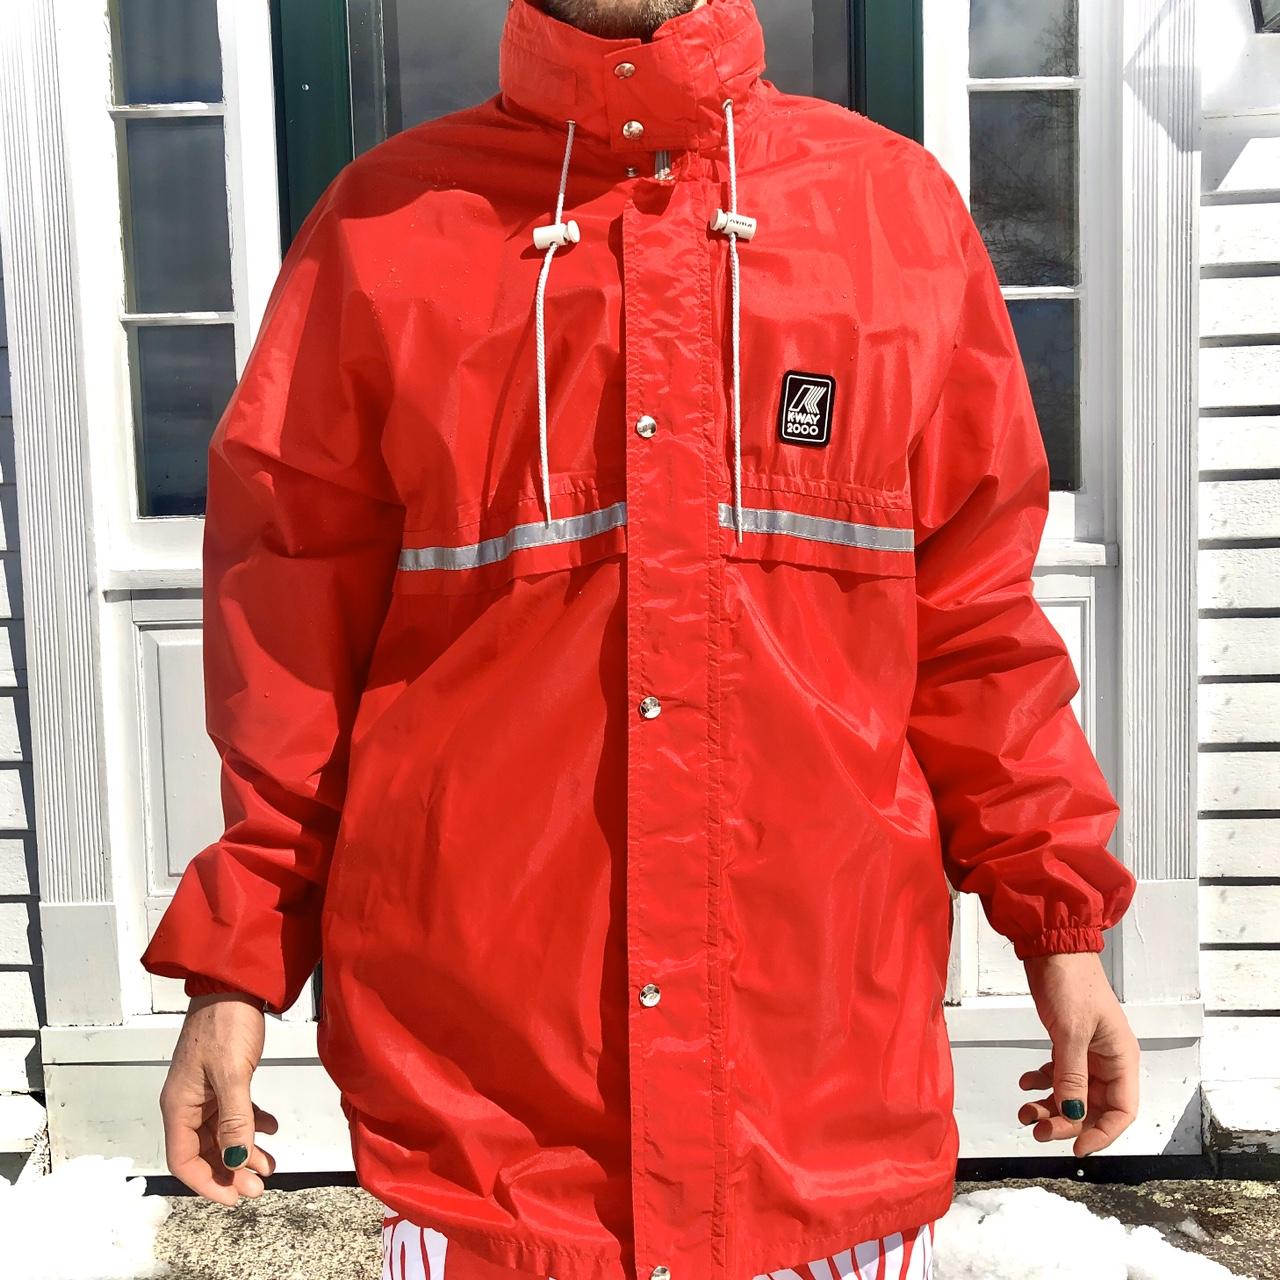 K-Way Men's Red and White Jacket (2)